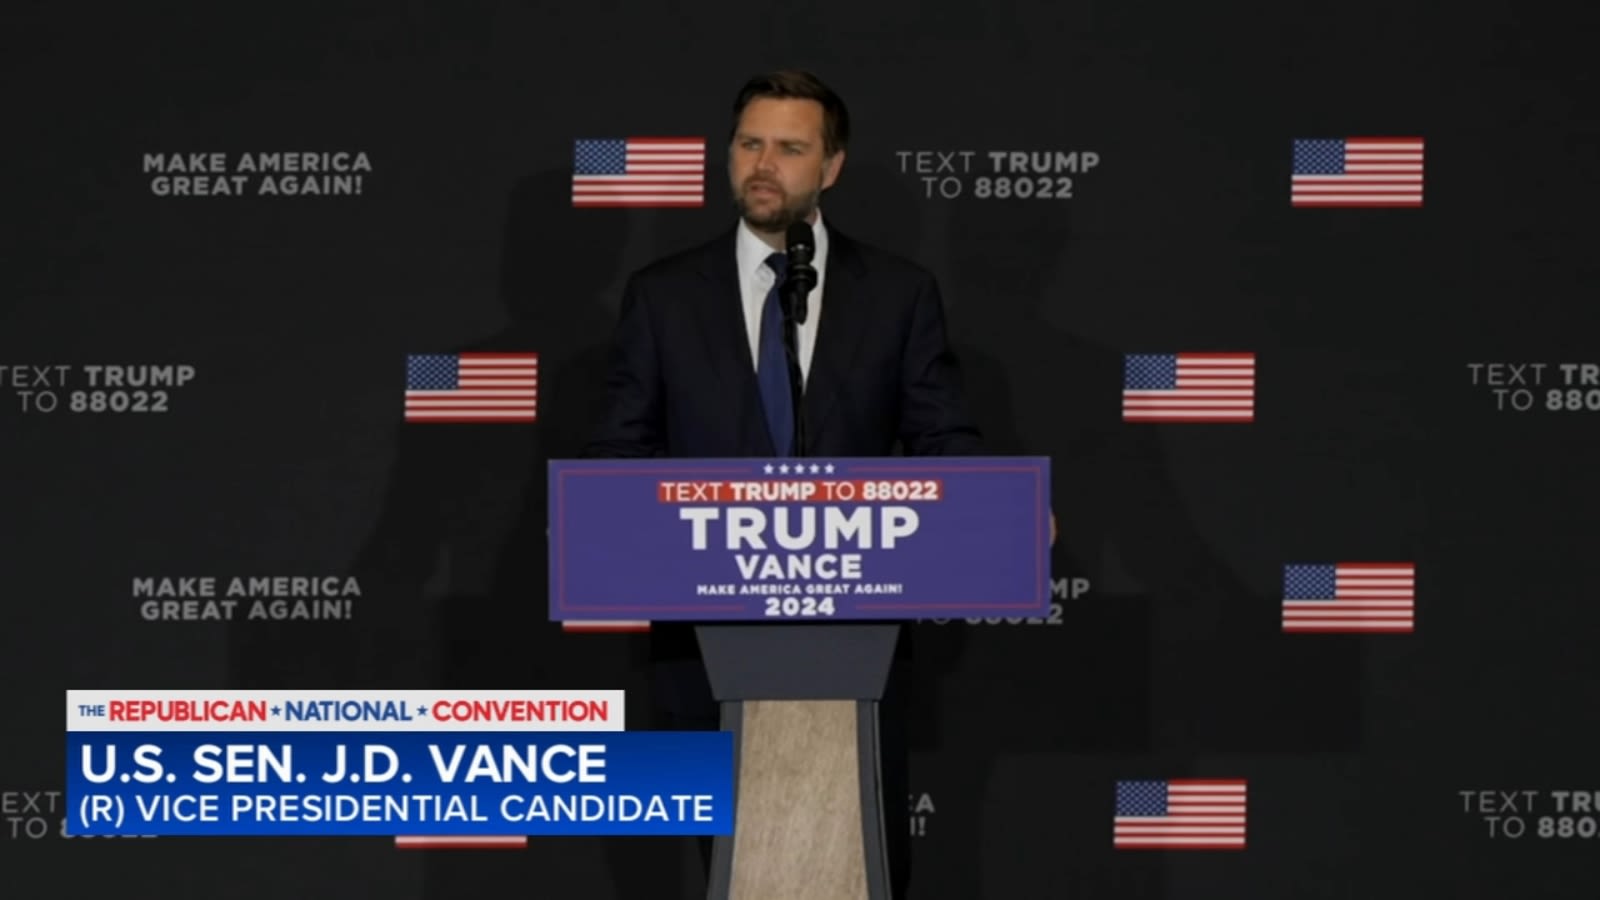 JD Vance will get his political introduction at RNC Wednesday as Trump's pick for vice president